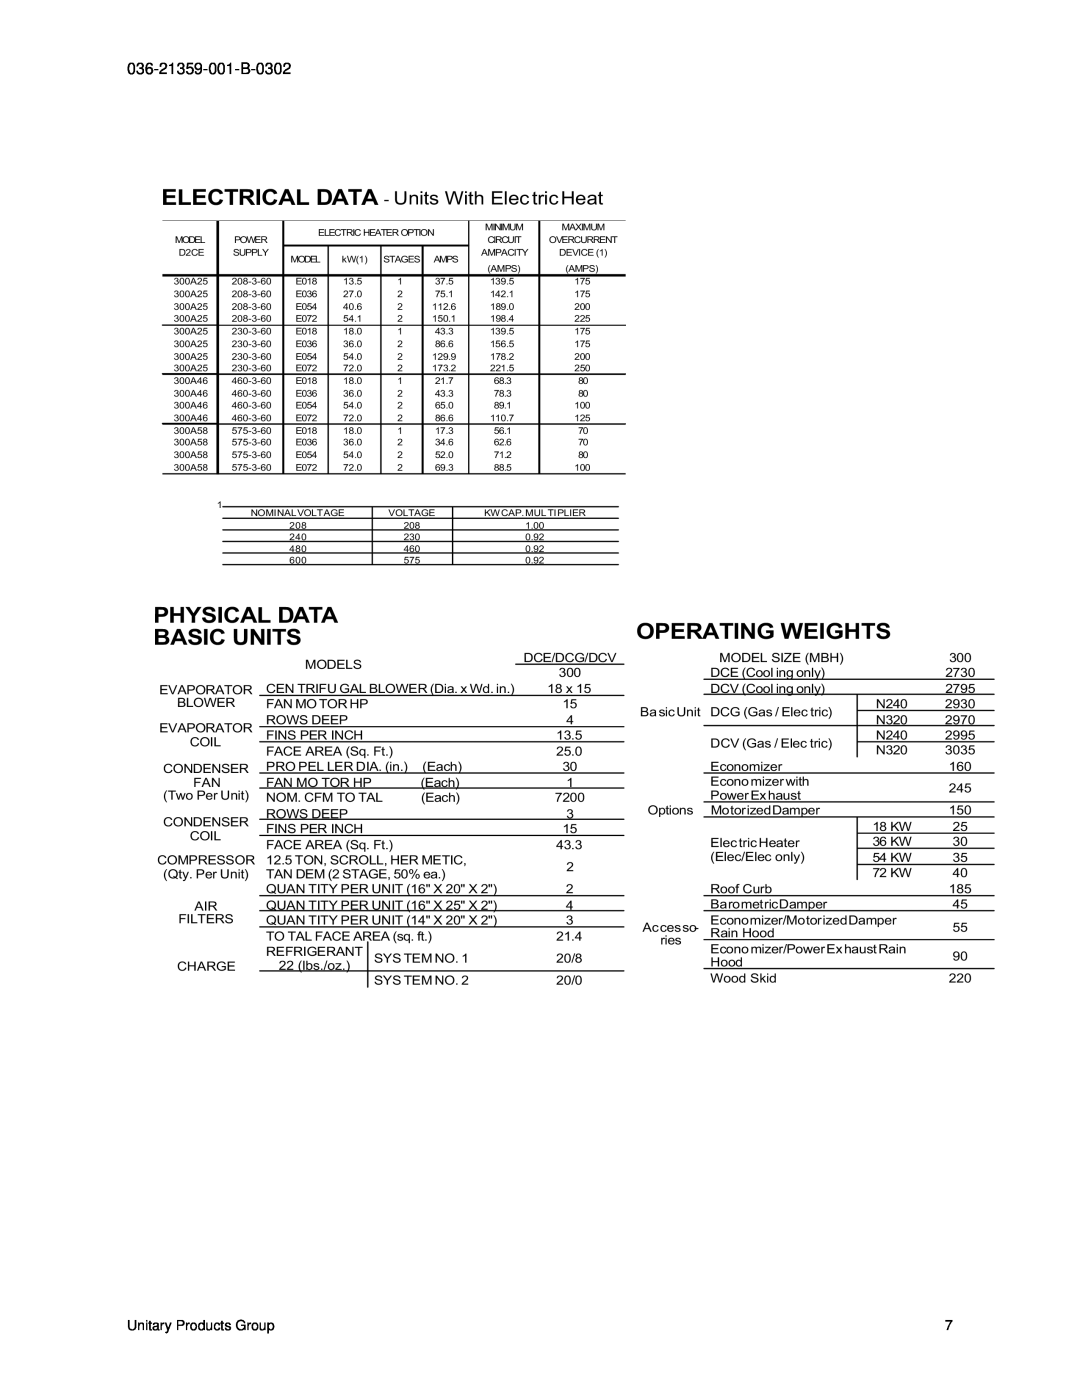 York D2CG, D2CE manual ELECTRICAL DATA - Units With Elec tric Heat, Physical Data Basic Units, Operating Weights 